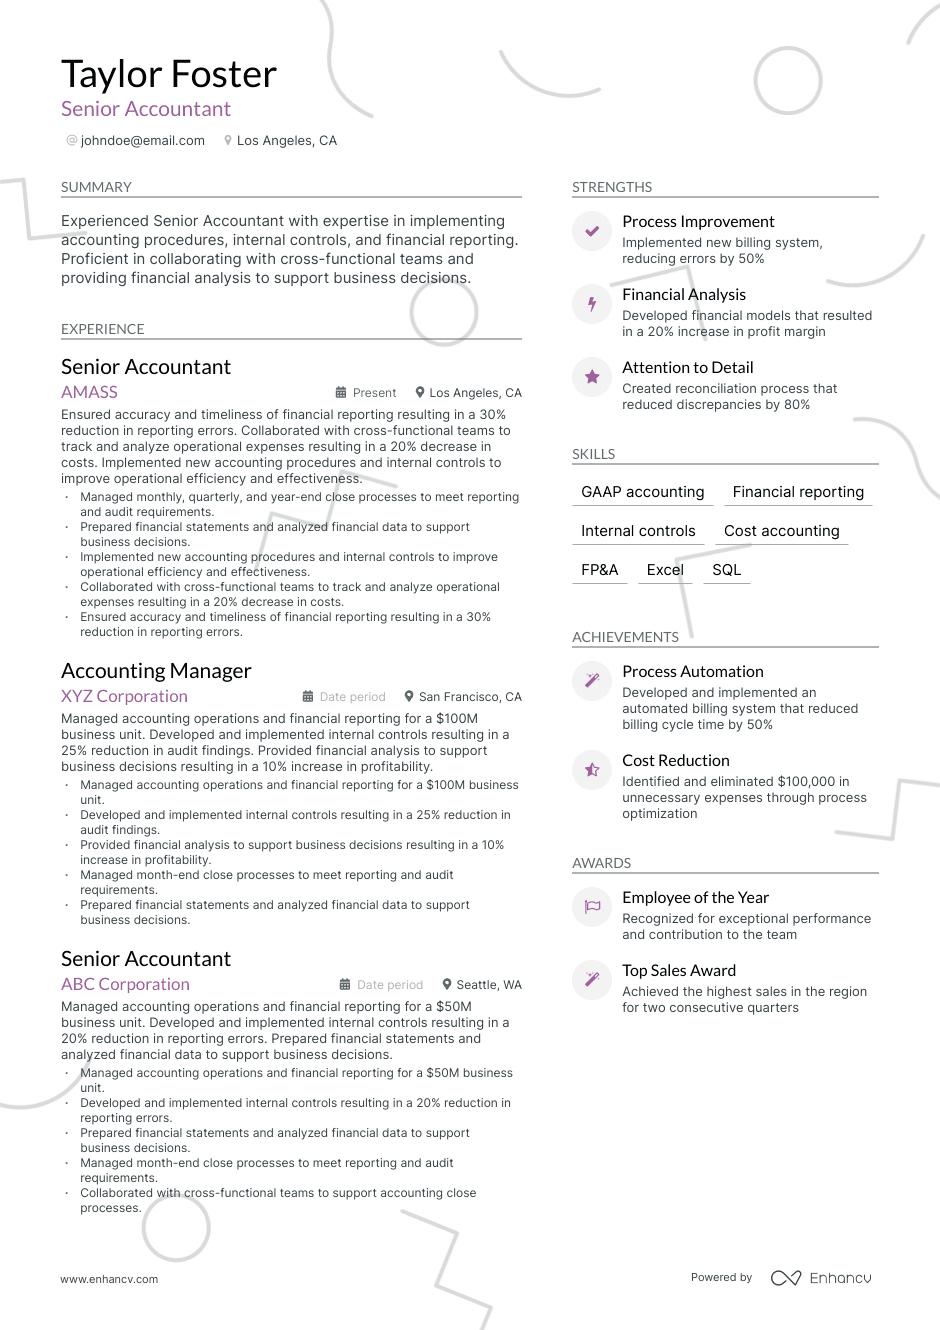 Functional accountant resume example